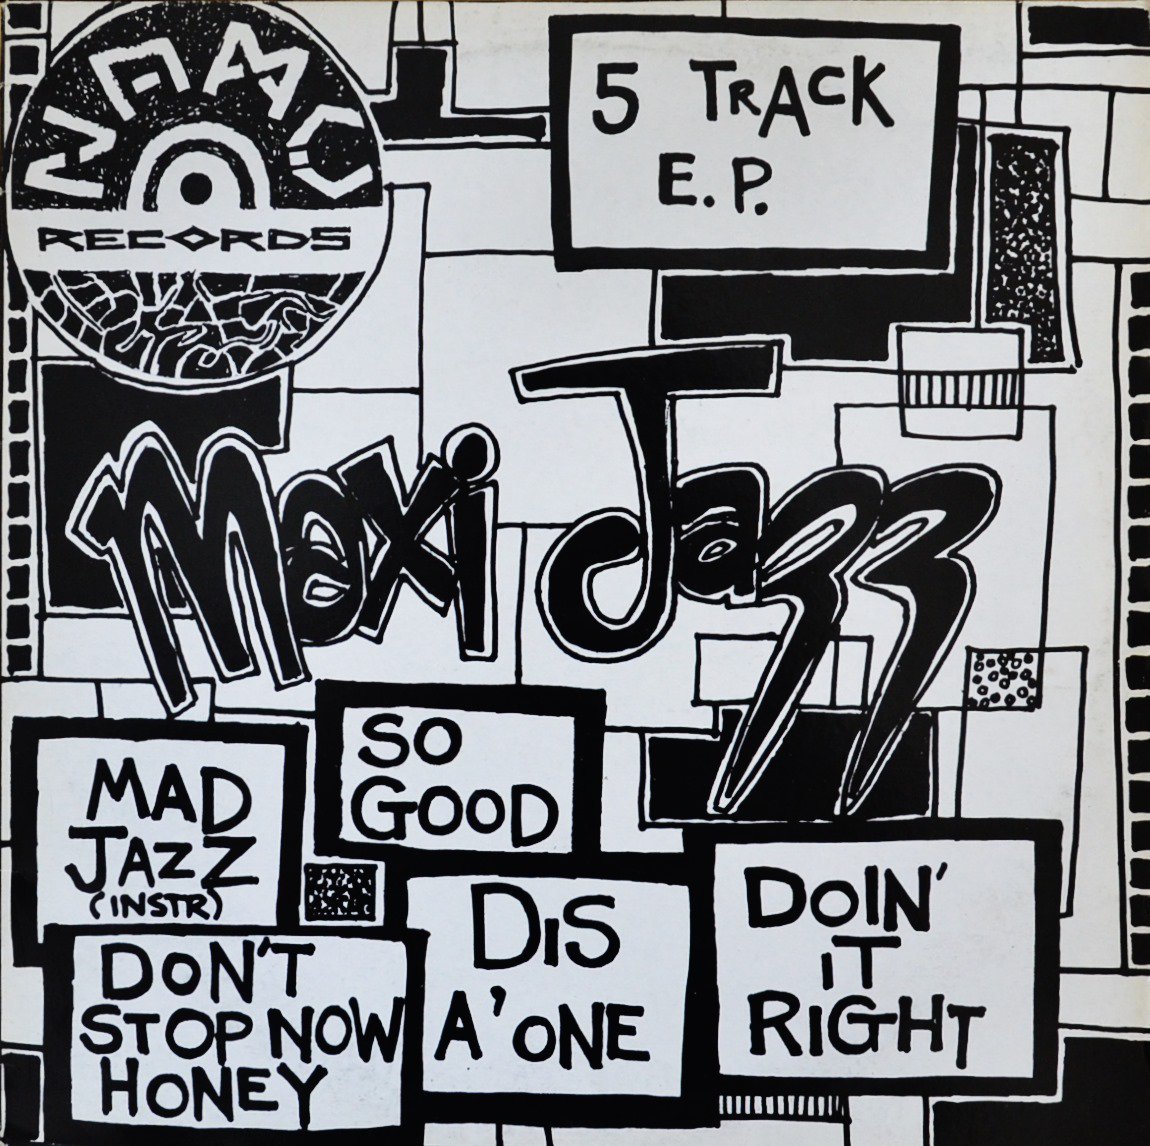 MAXI JAZZ / DOIN' IT RIGHT / DIS A' ONE / DON'T STOP NOW HONEY (EP) (12